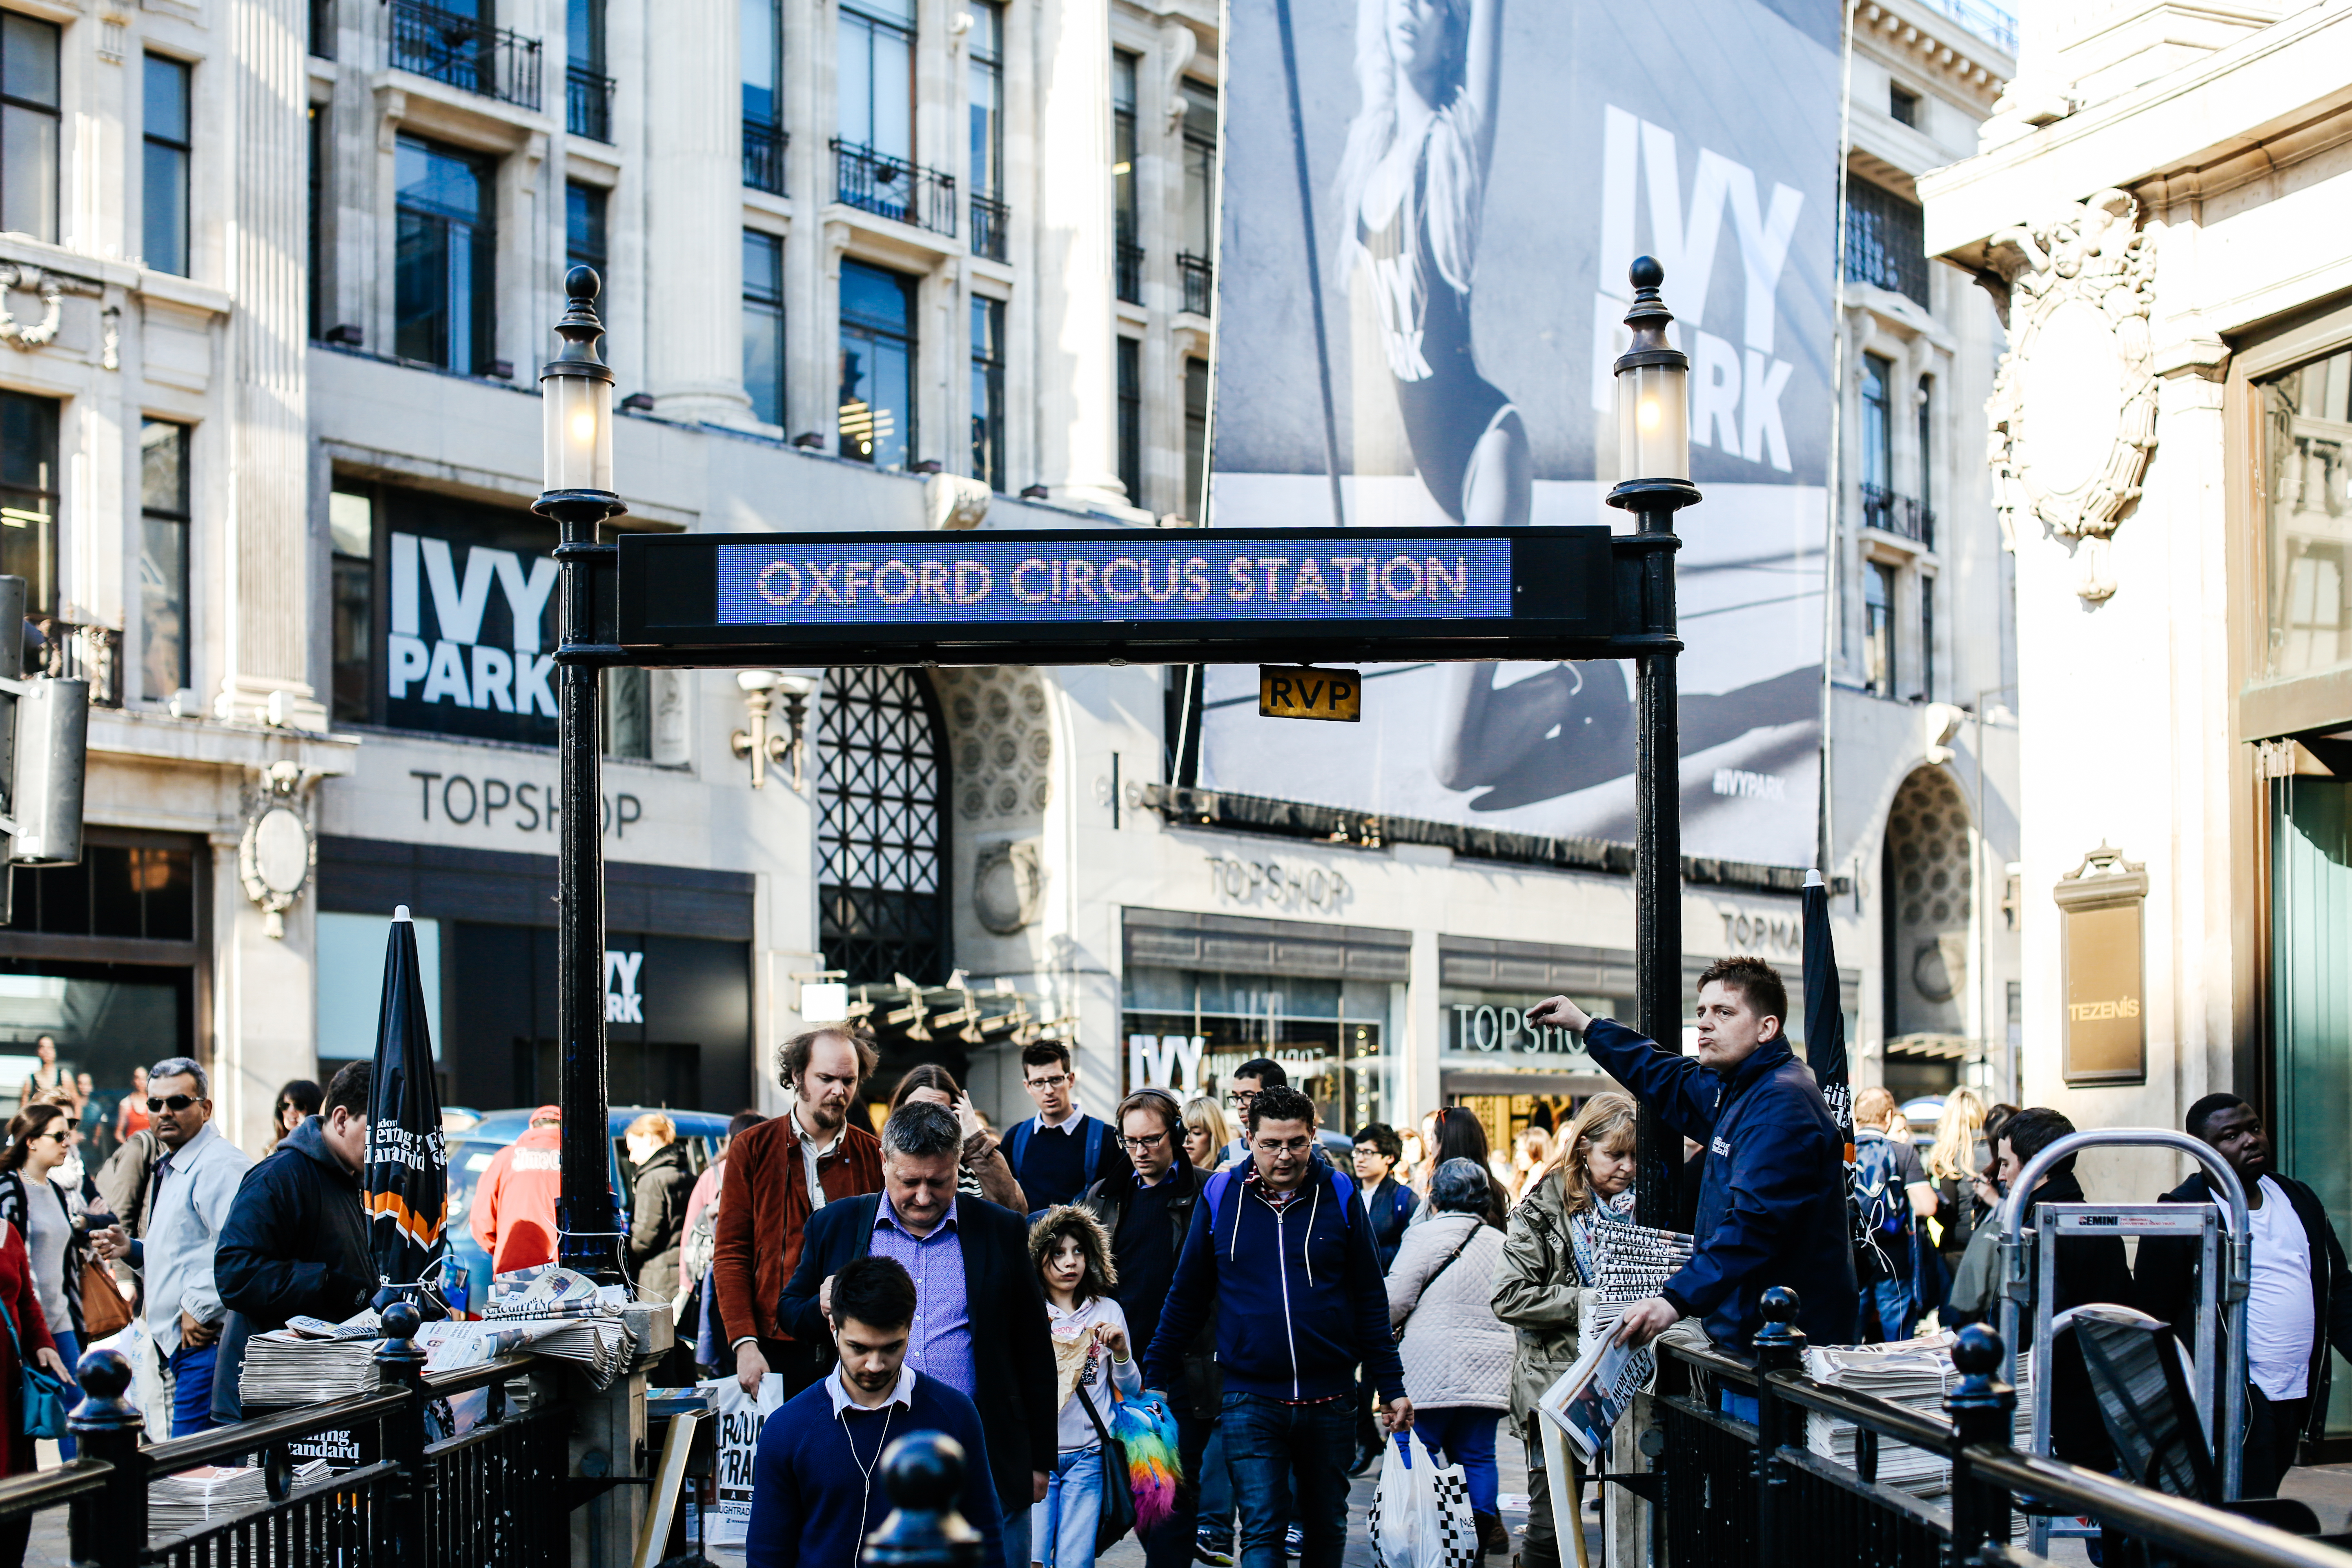 Oxford Circus tube station with Topshop in background